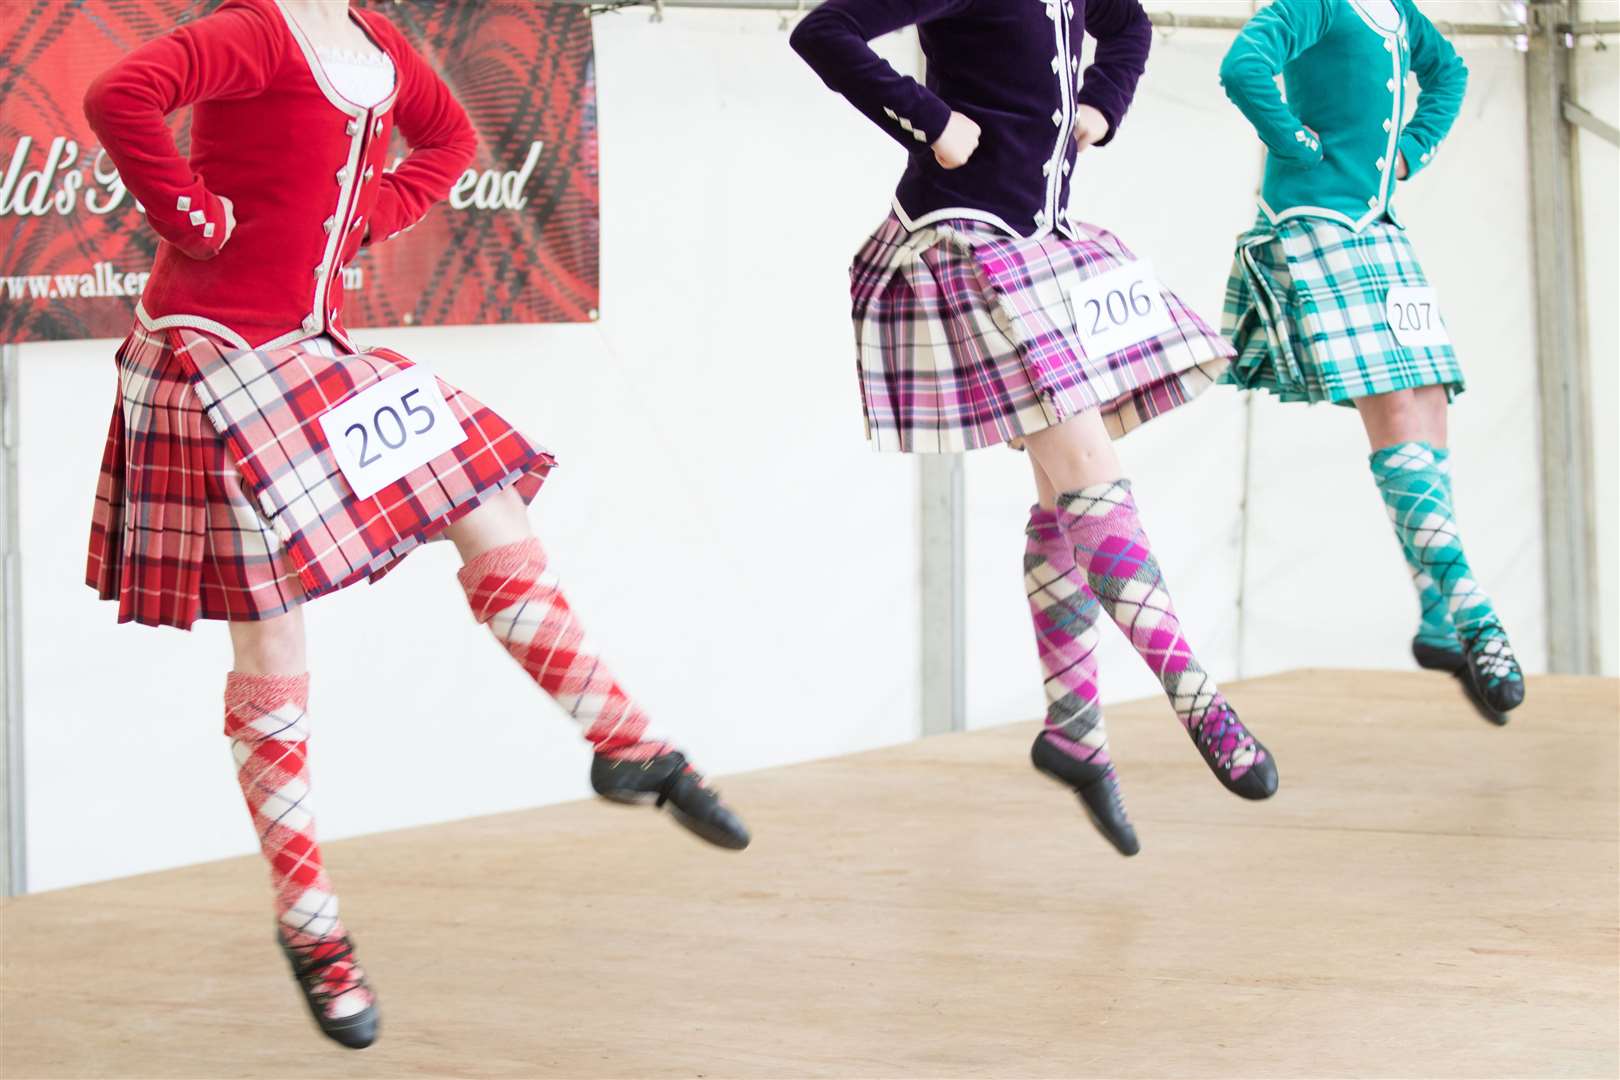 Highland dancing will be one of the many attractions on offer during the event.